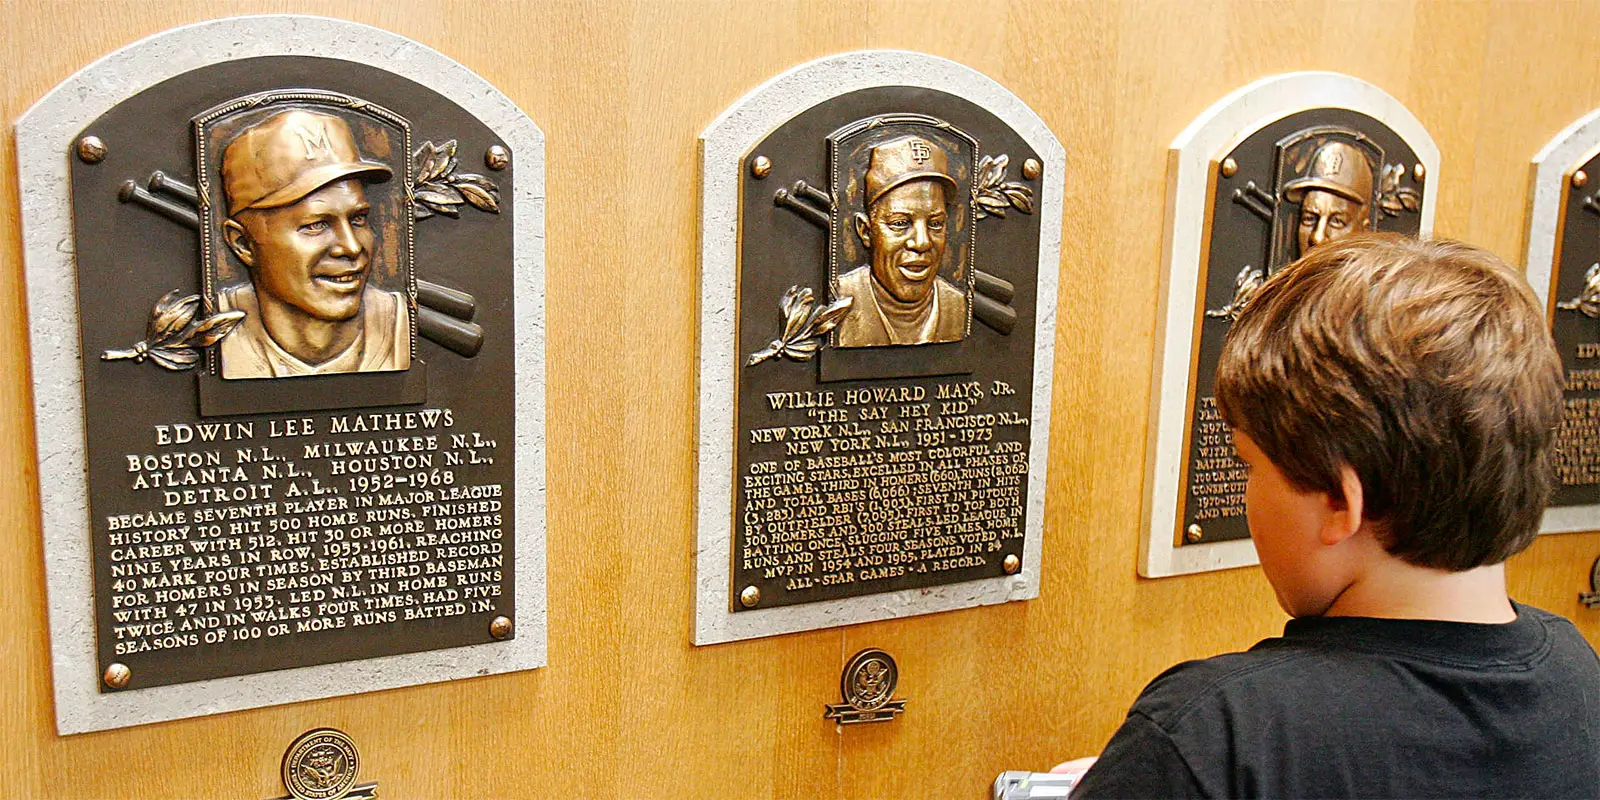 National Baseball Hall of Fame and Museum - In baseball, the